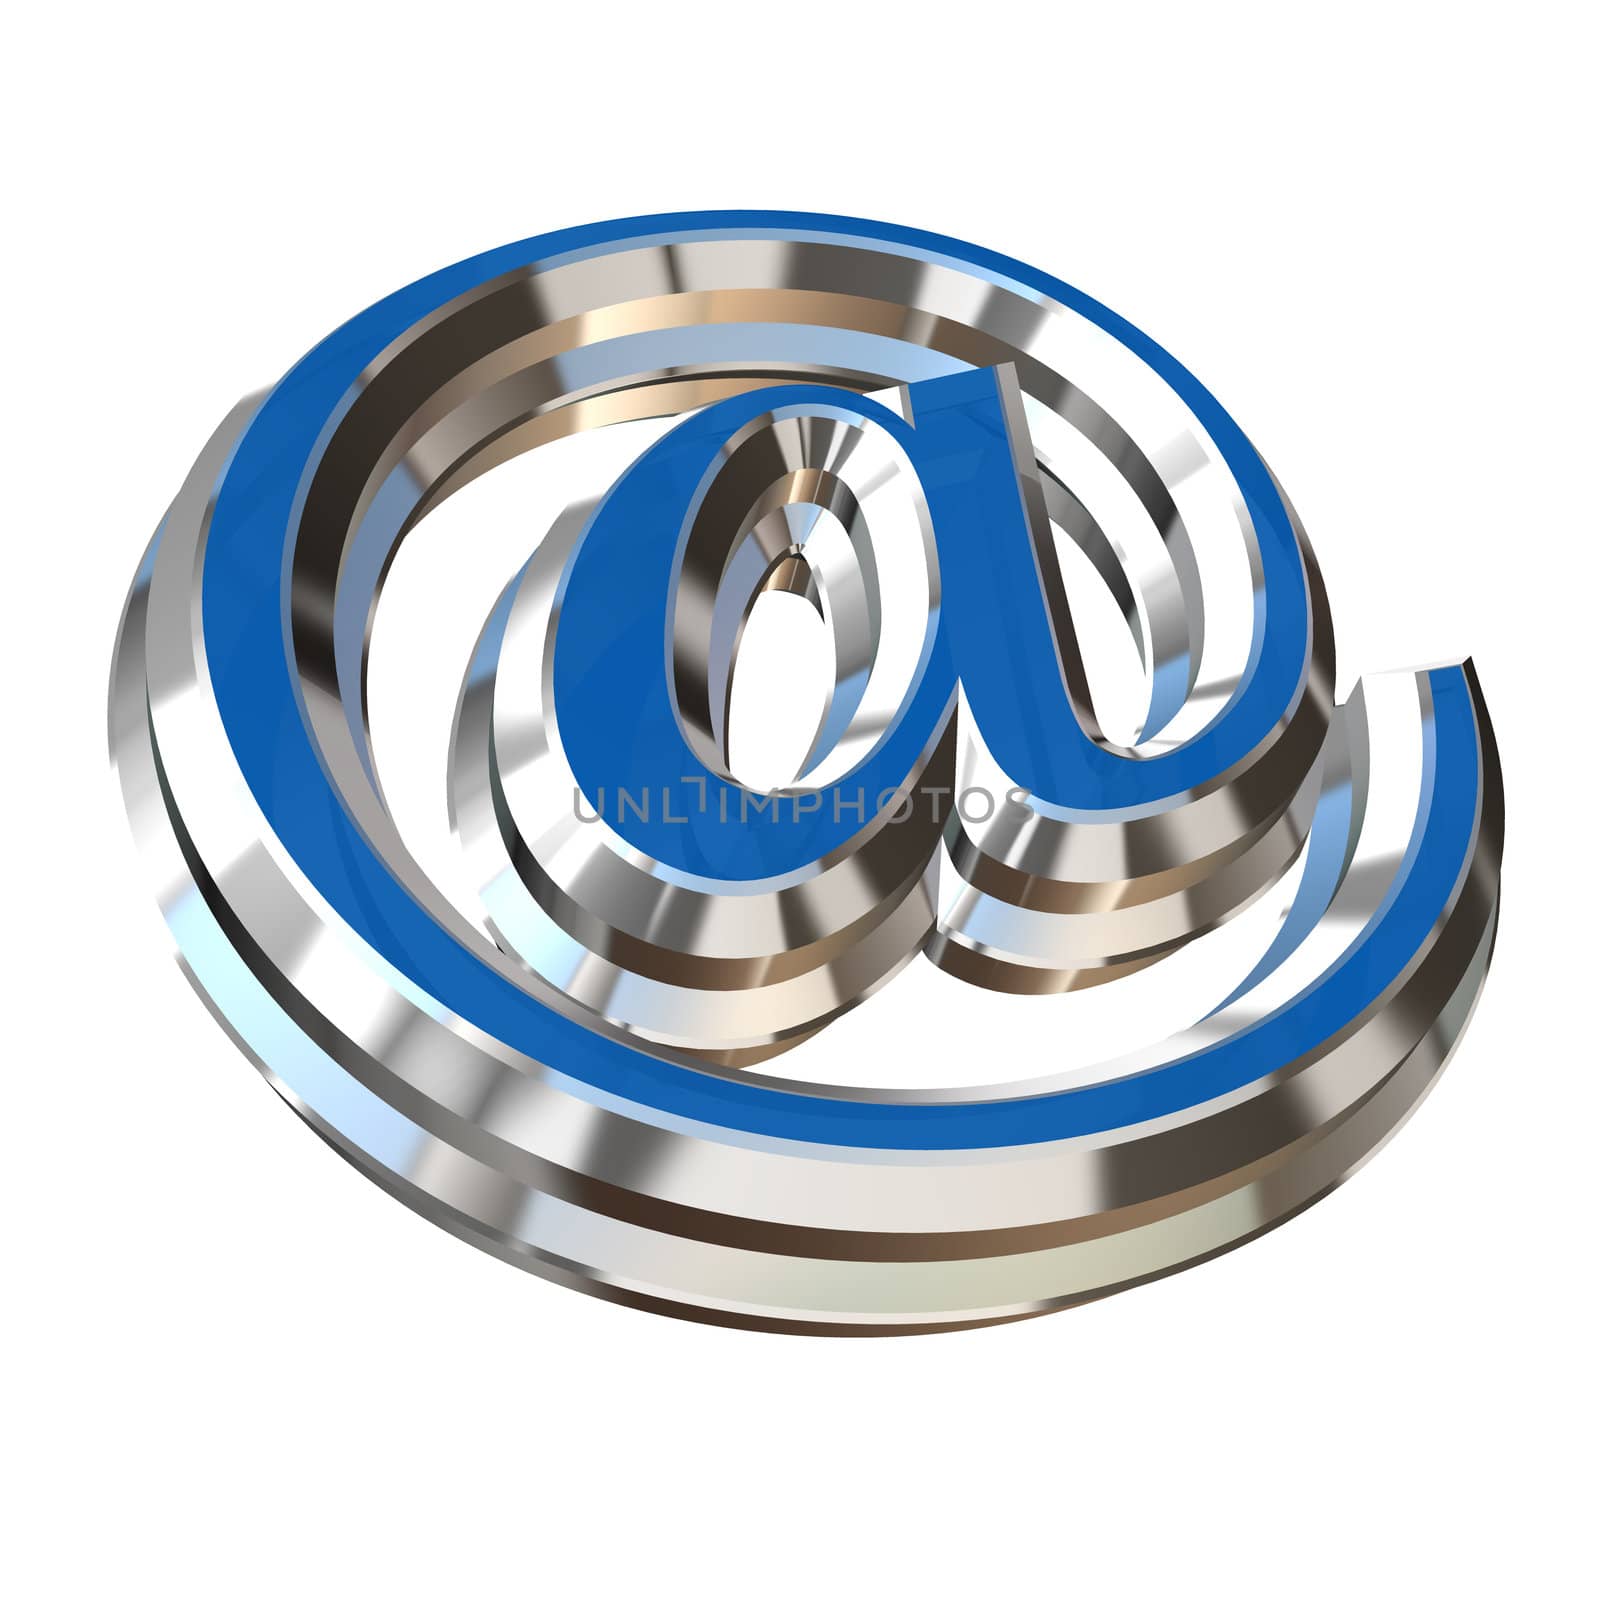 3d alias of email in metalic blue isolated on a white background